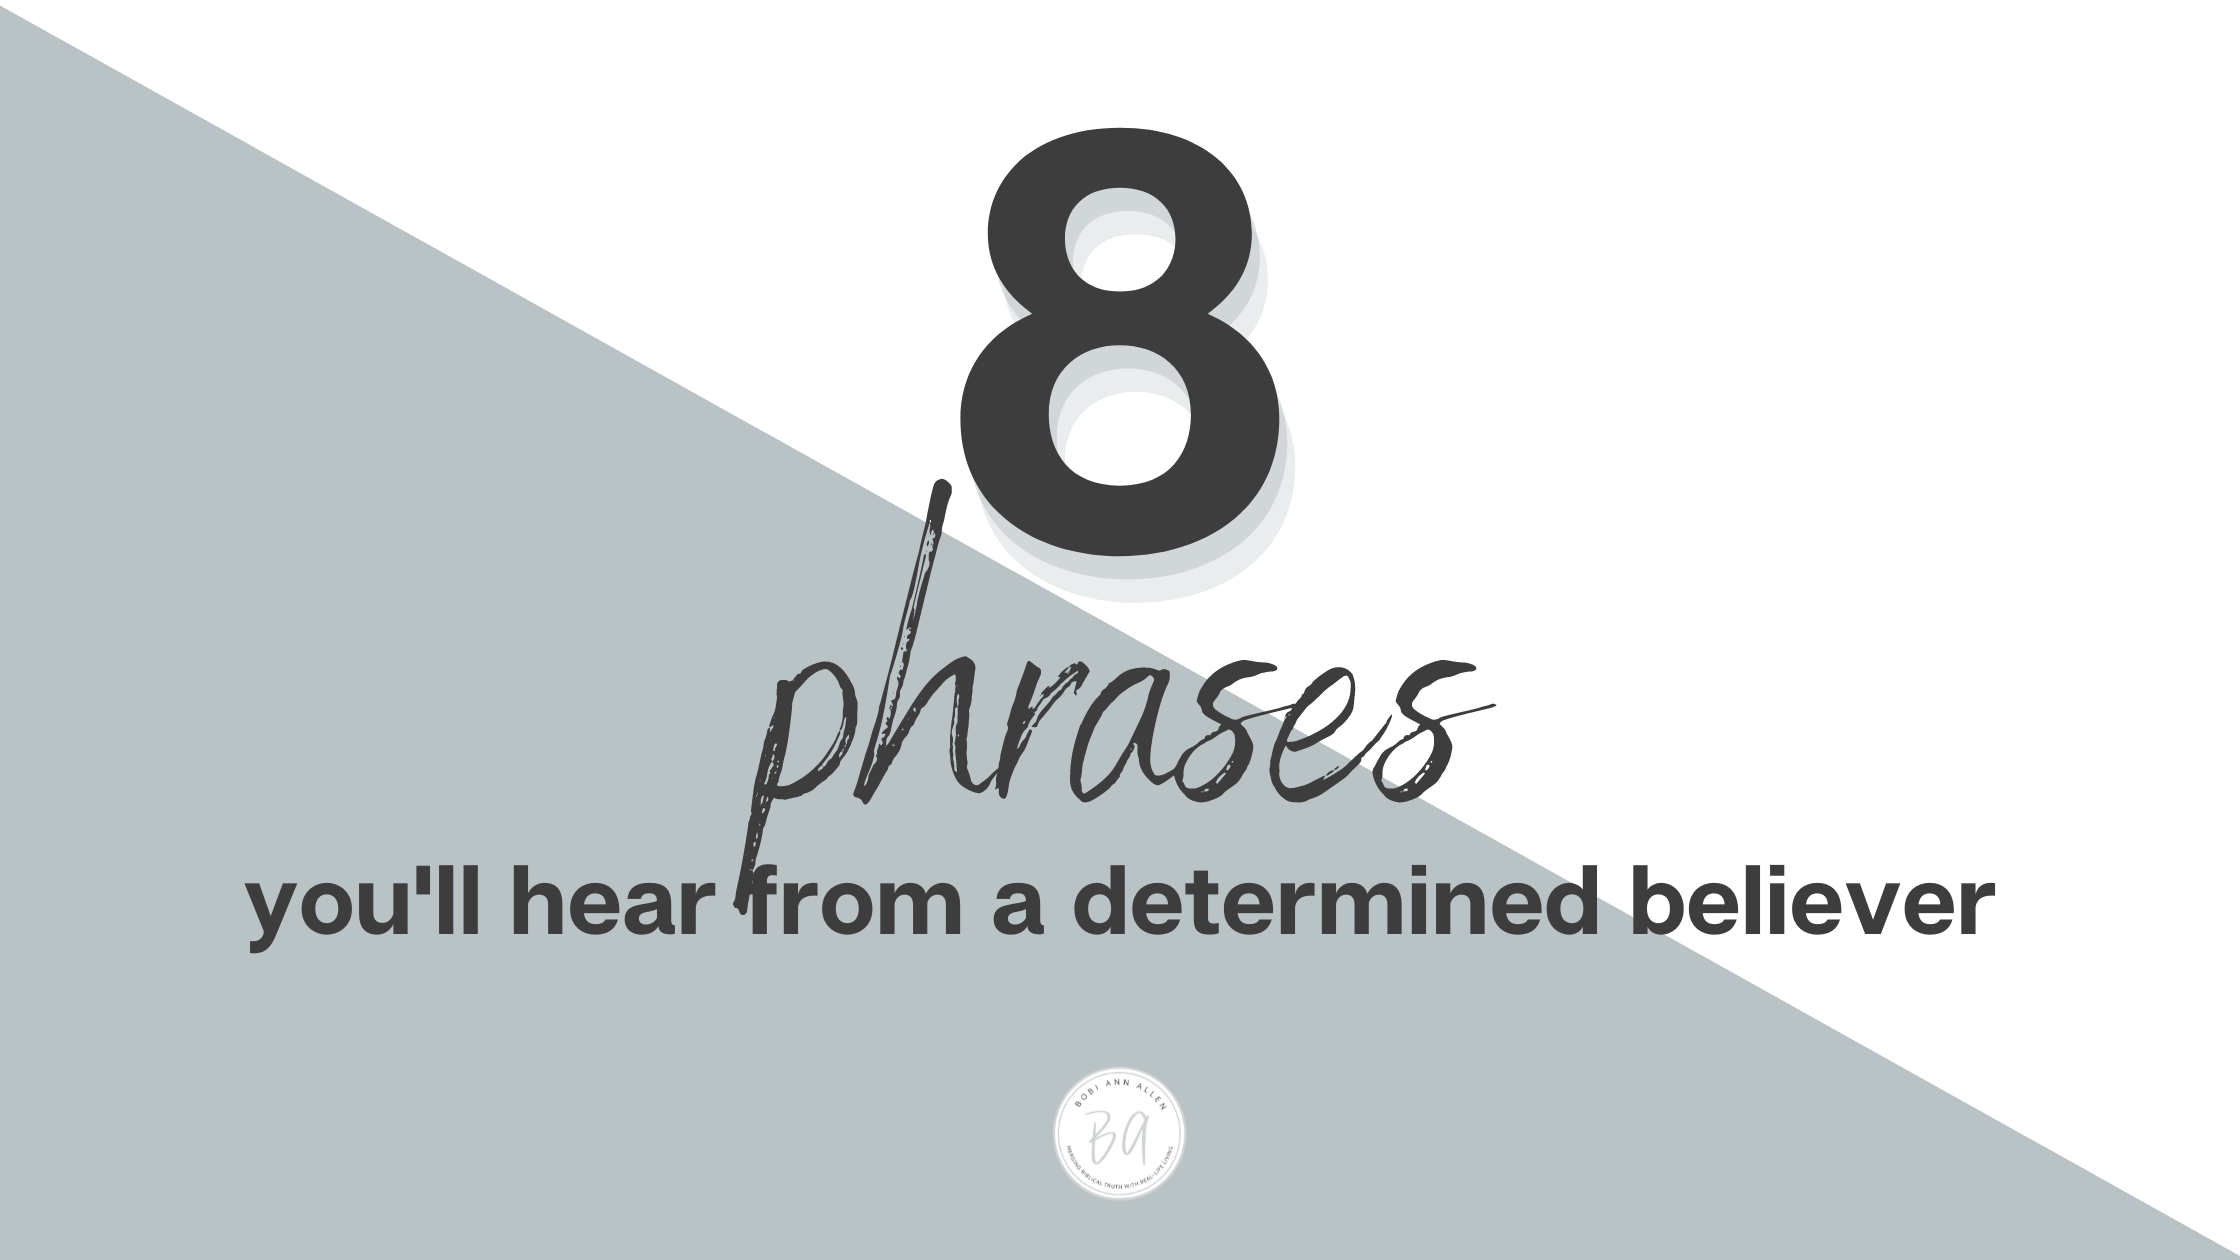 8 phrases you’ll hear from a determined Jesus-follower